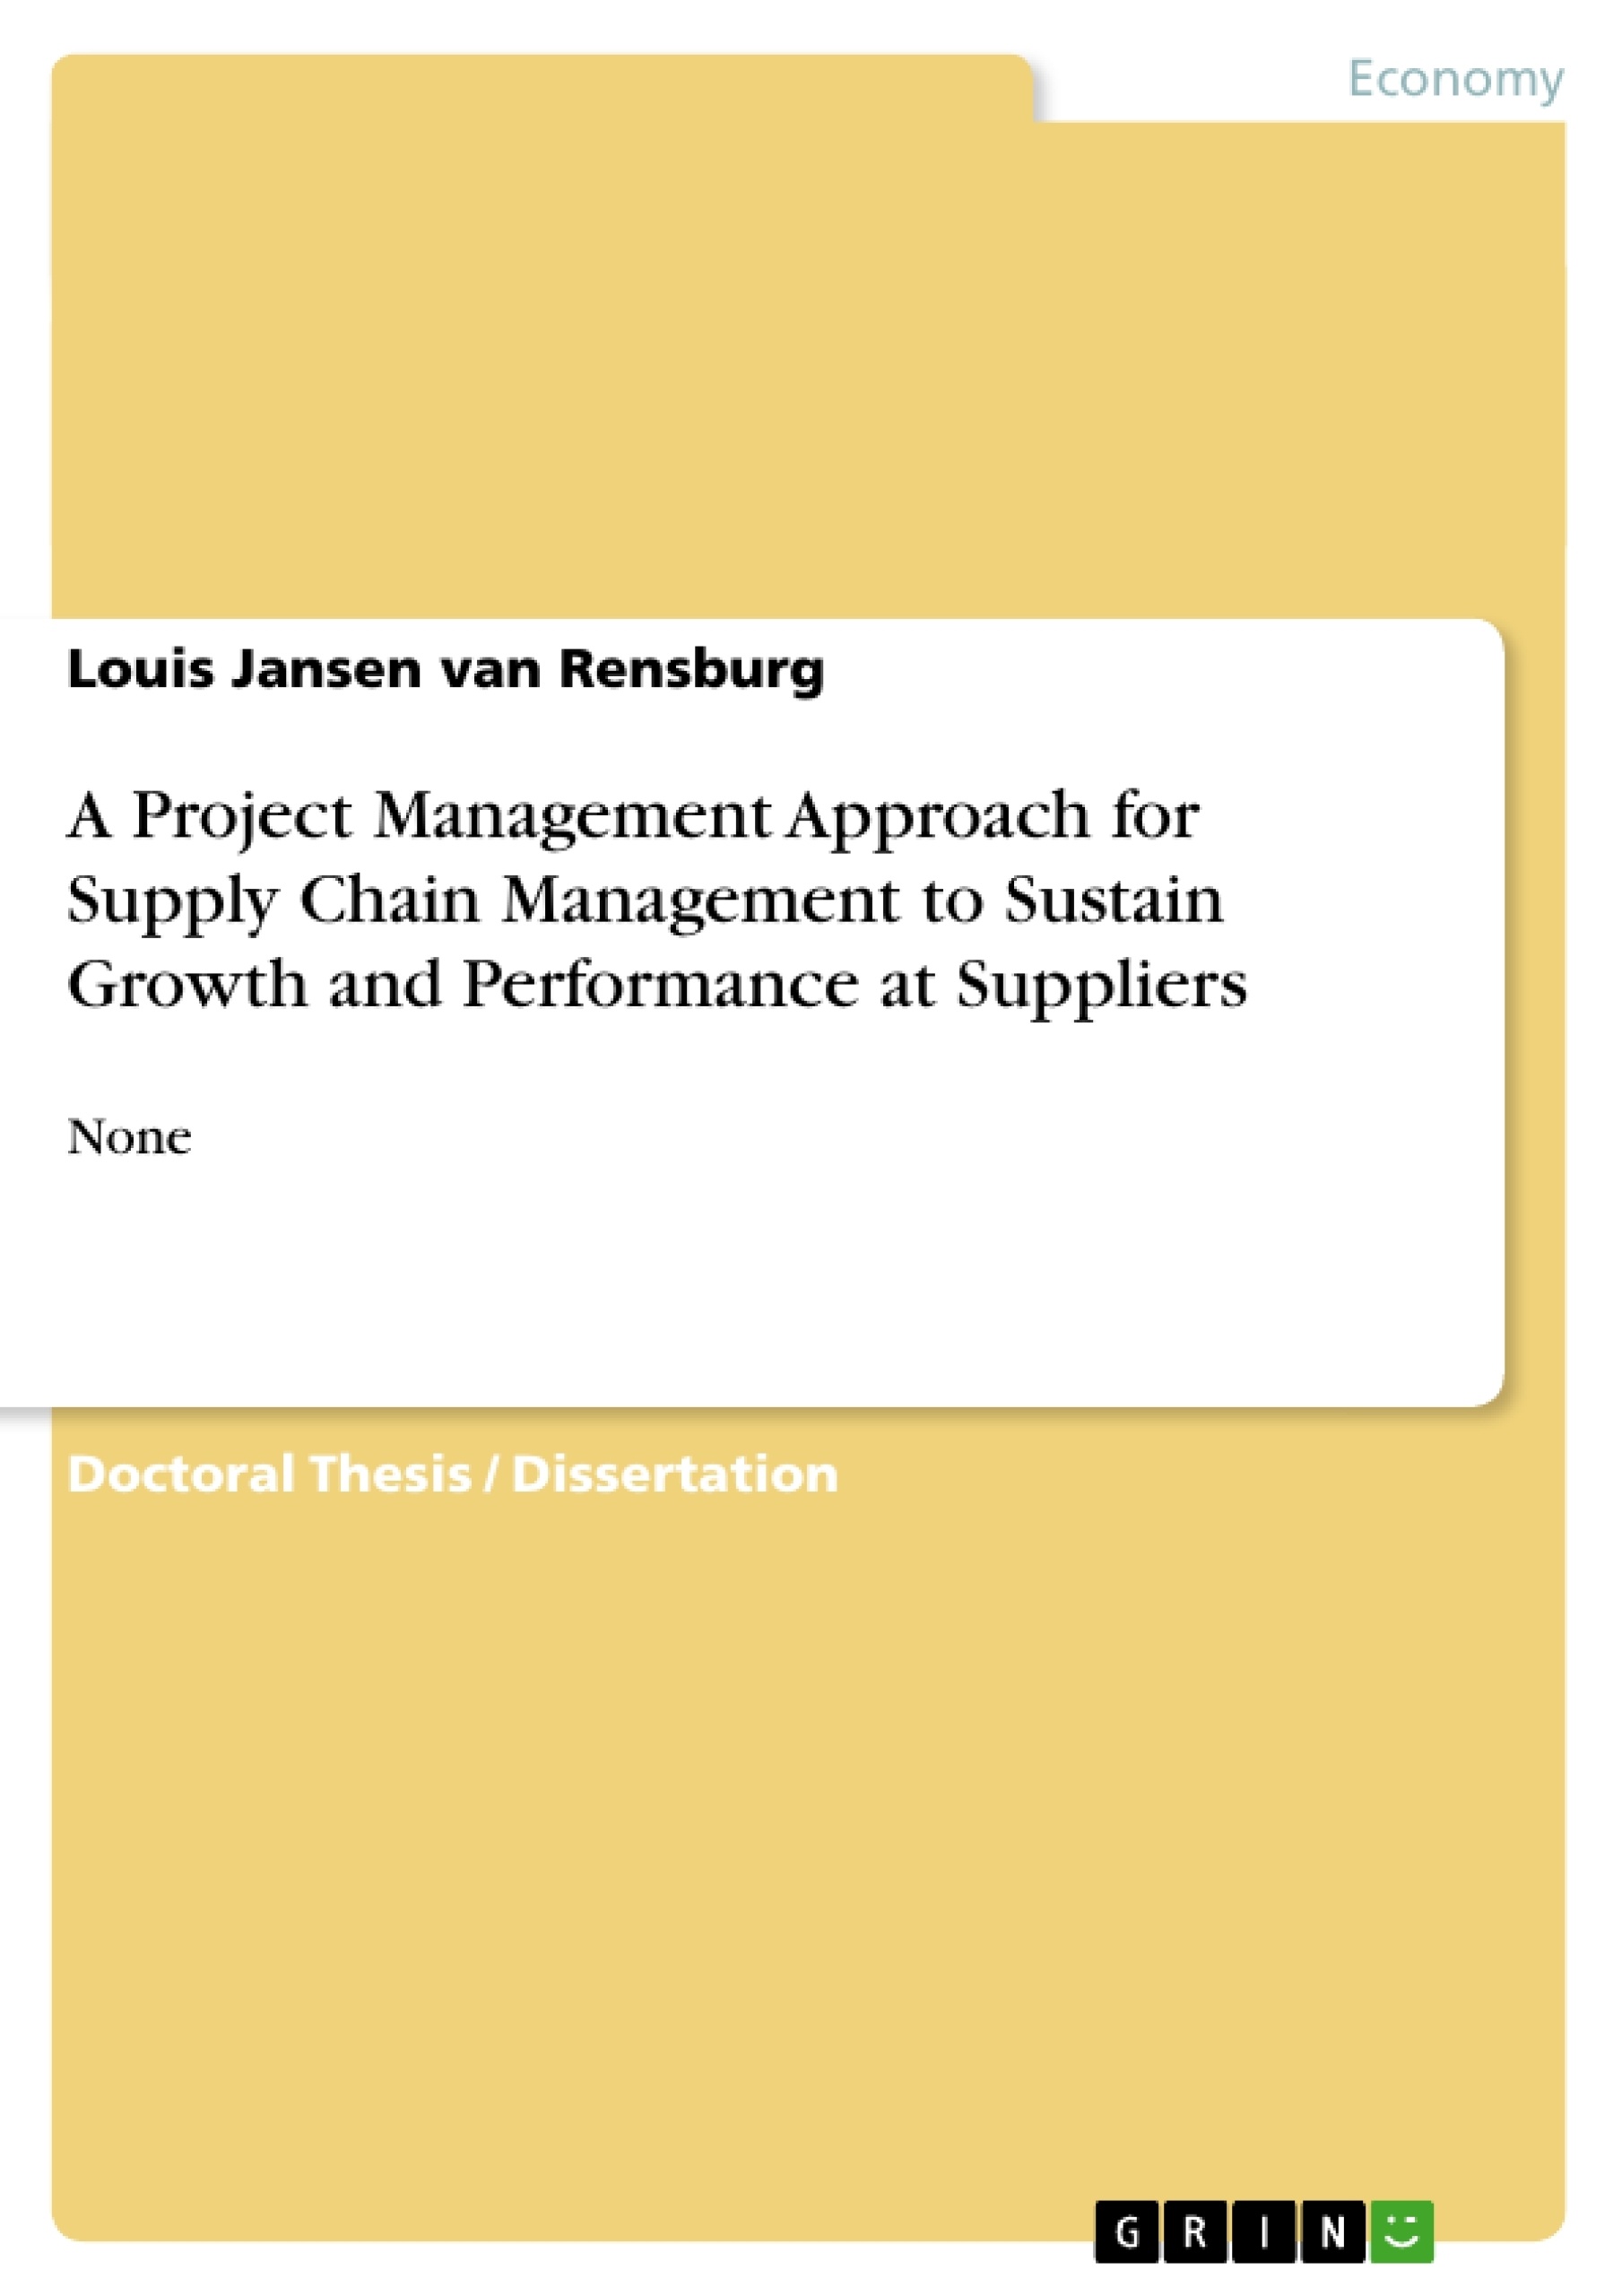 Title: A Project Management Approach for Supply Chain Management to Sustain Growth and Performance at Suppliers